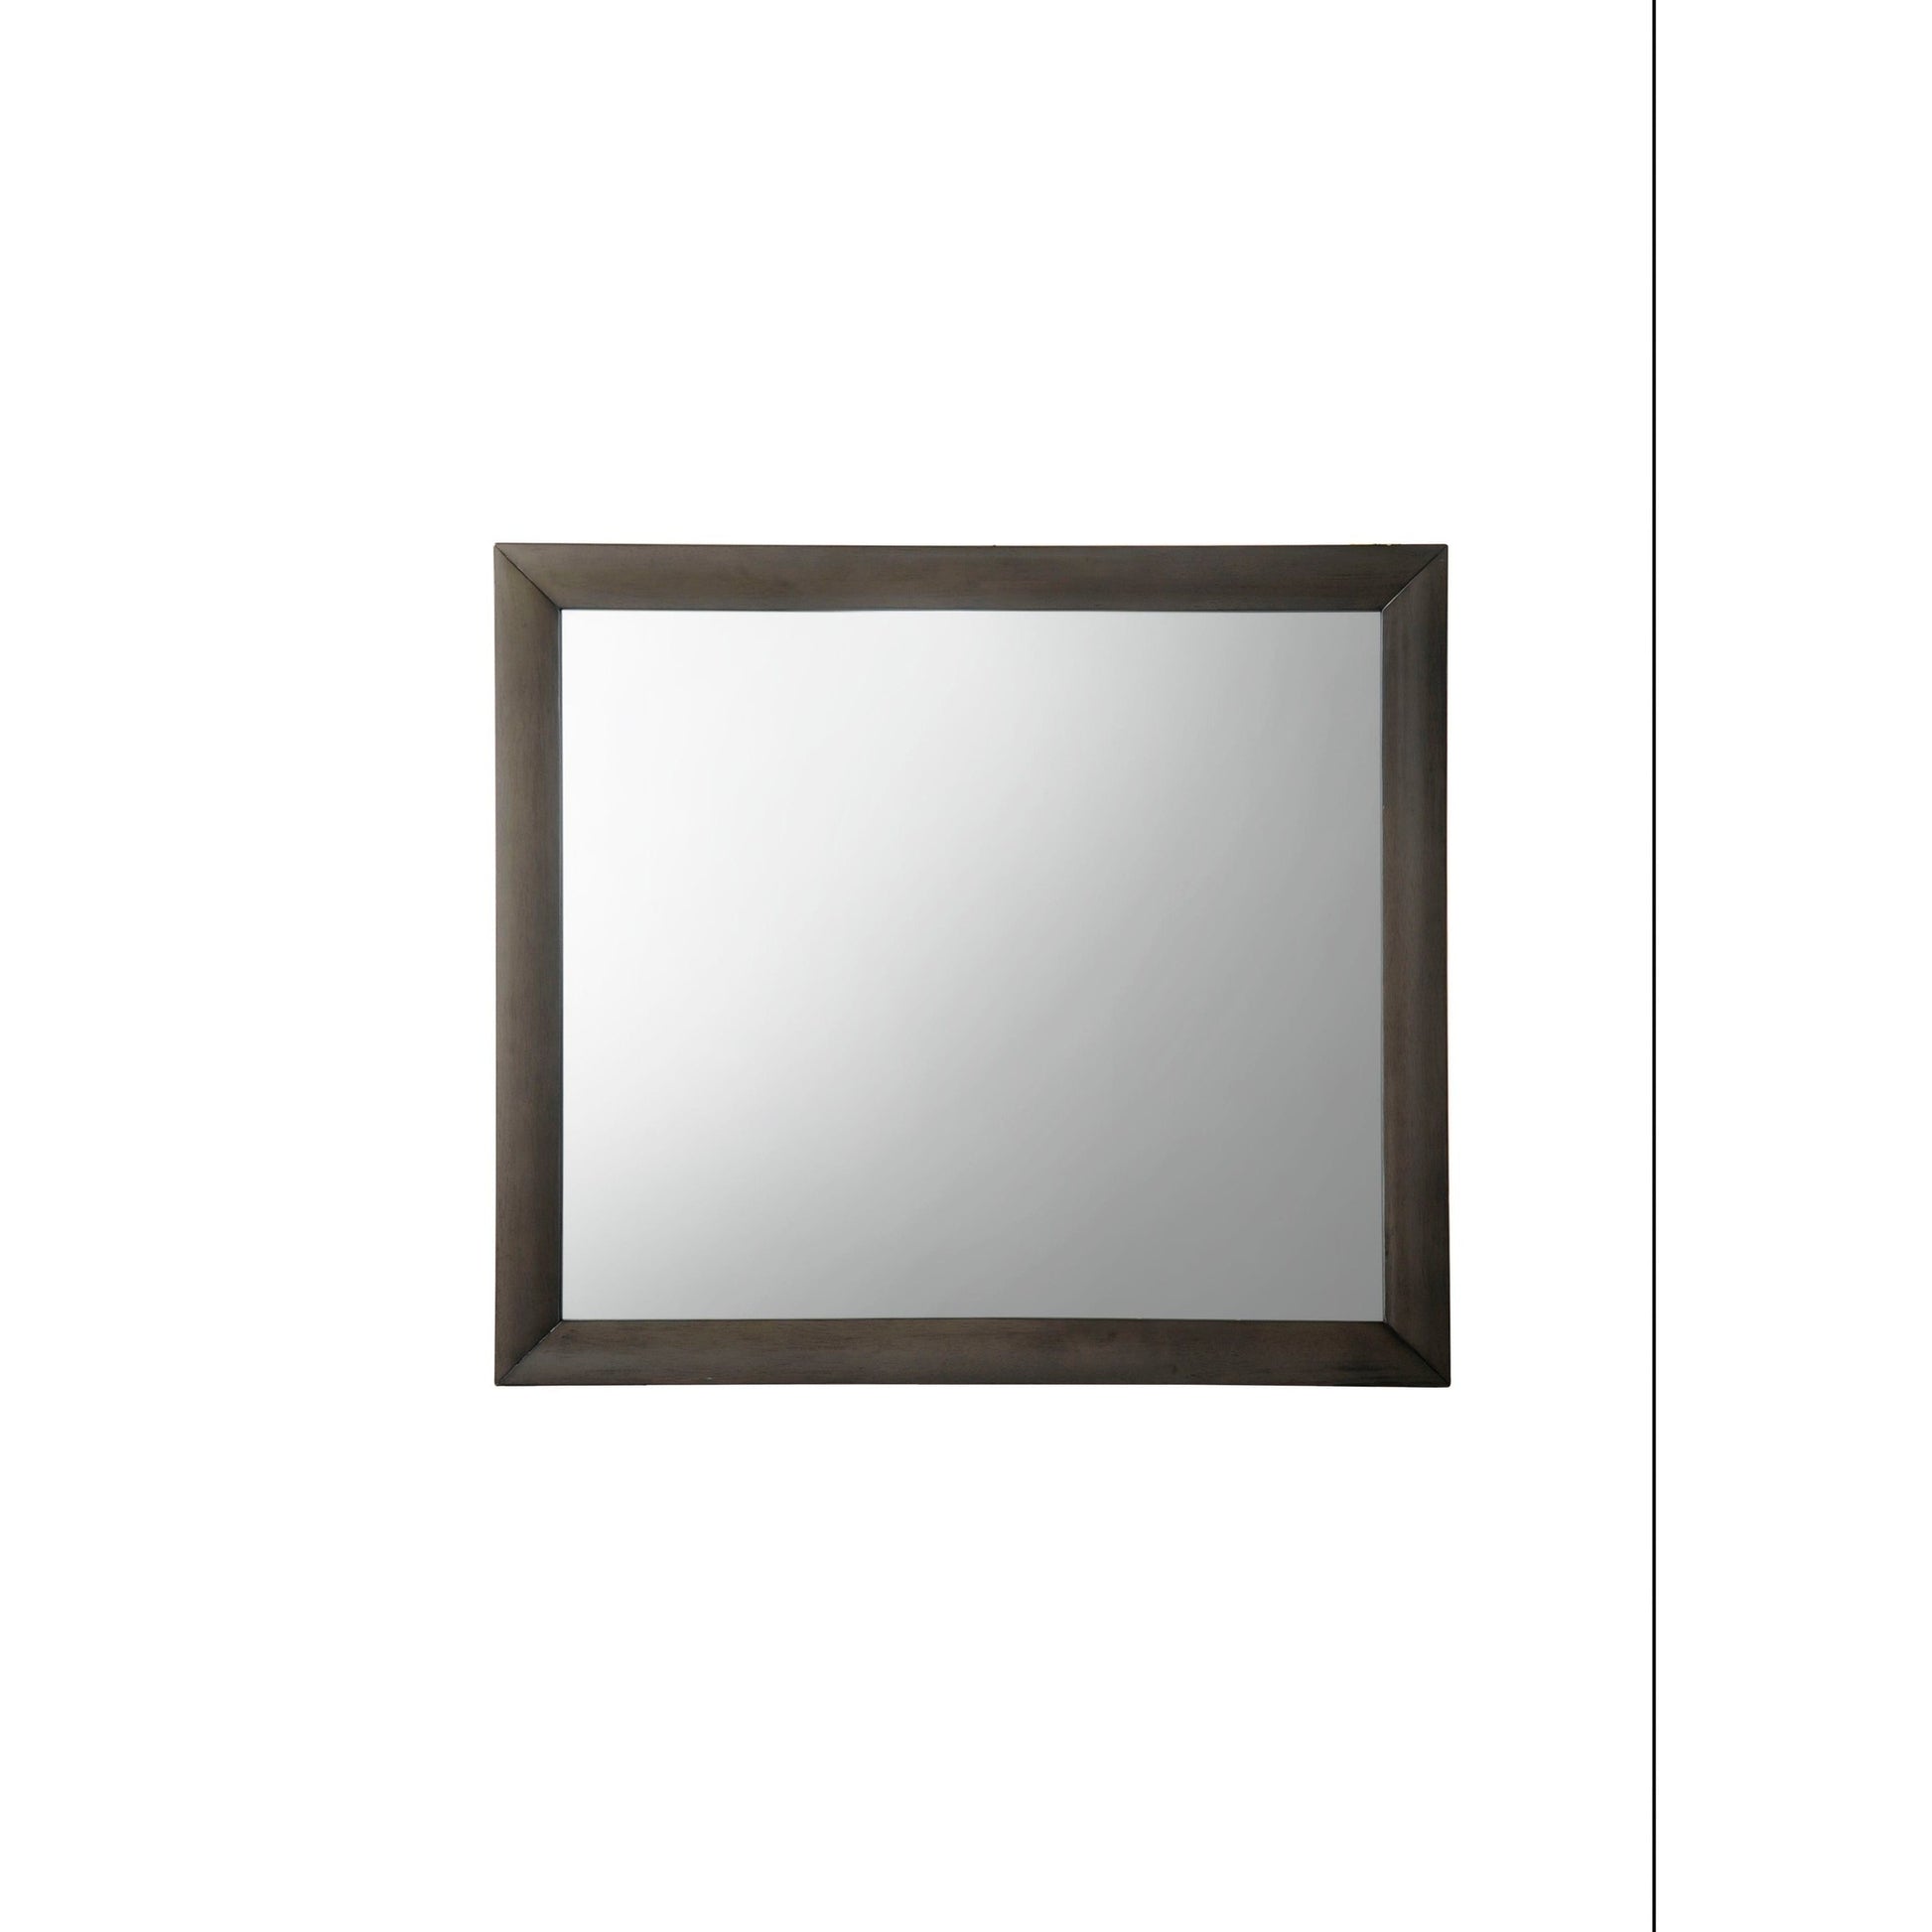 Benzara Gray and Silver Transition Style Wooden Mirror With Rectangular Shape